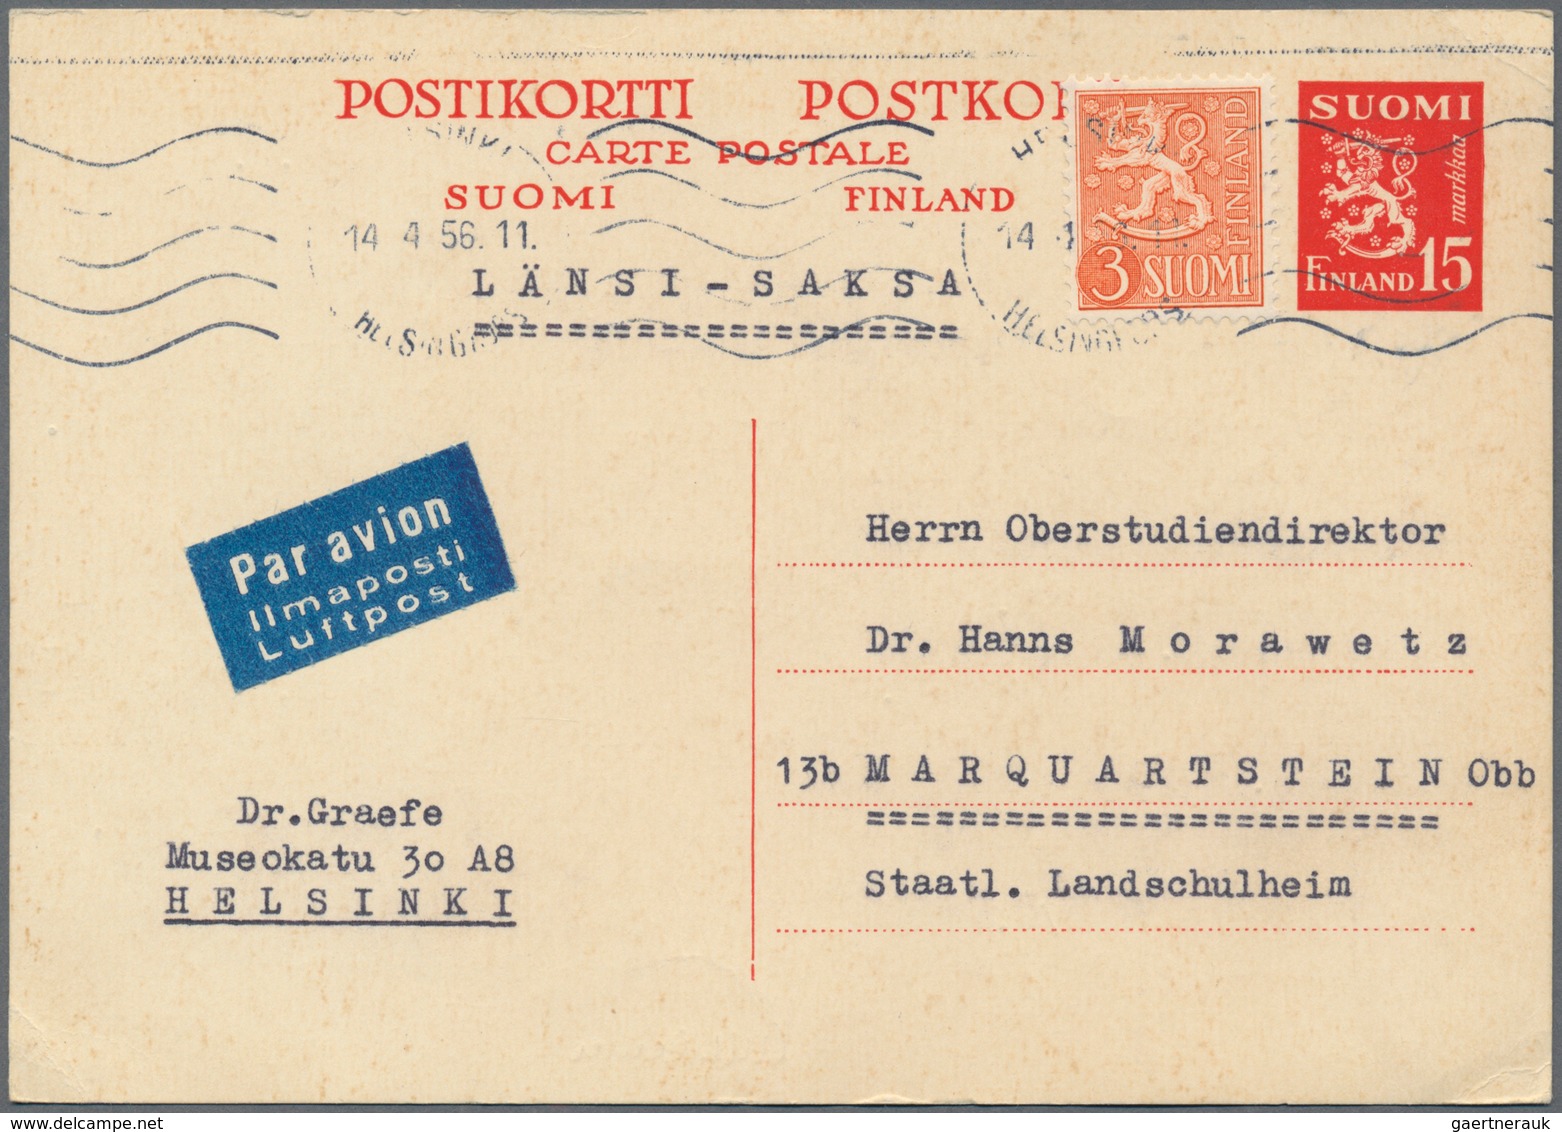 Finnland: 1860/1970, 626 covers and cards, starting with early stationeries, letters and parcel card